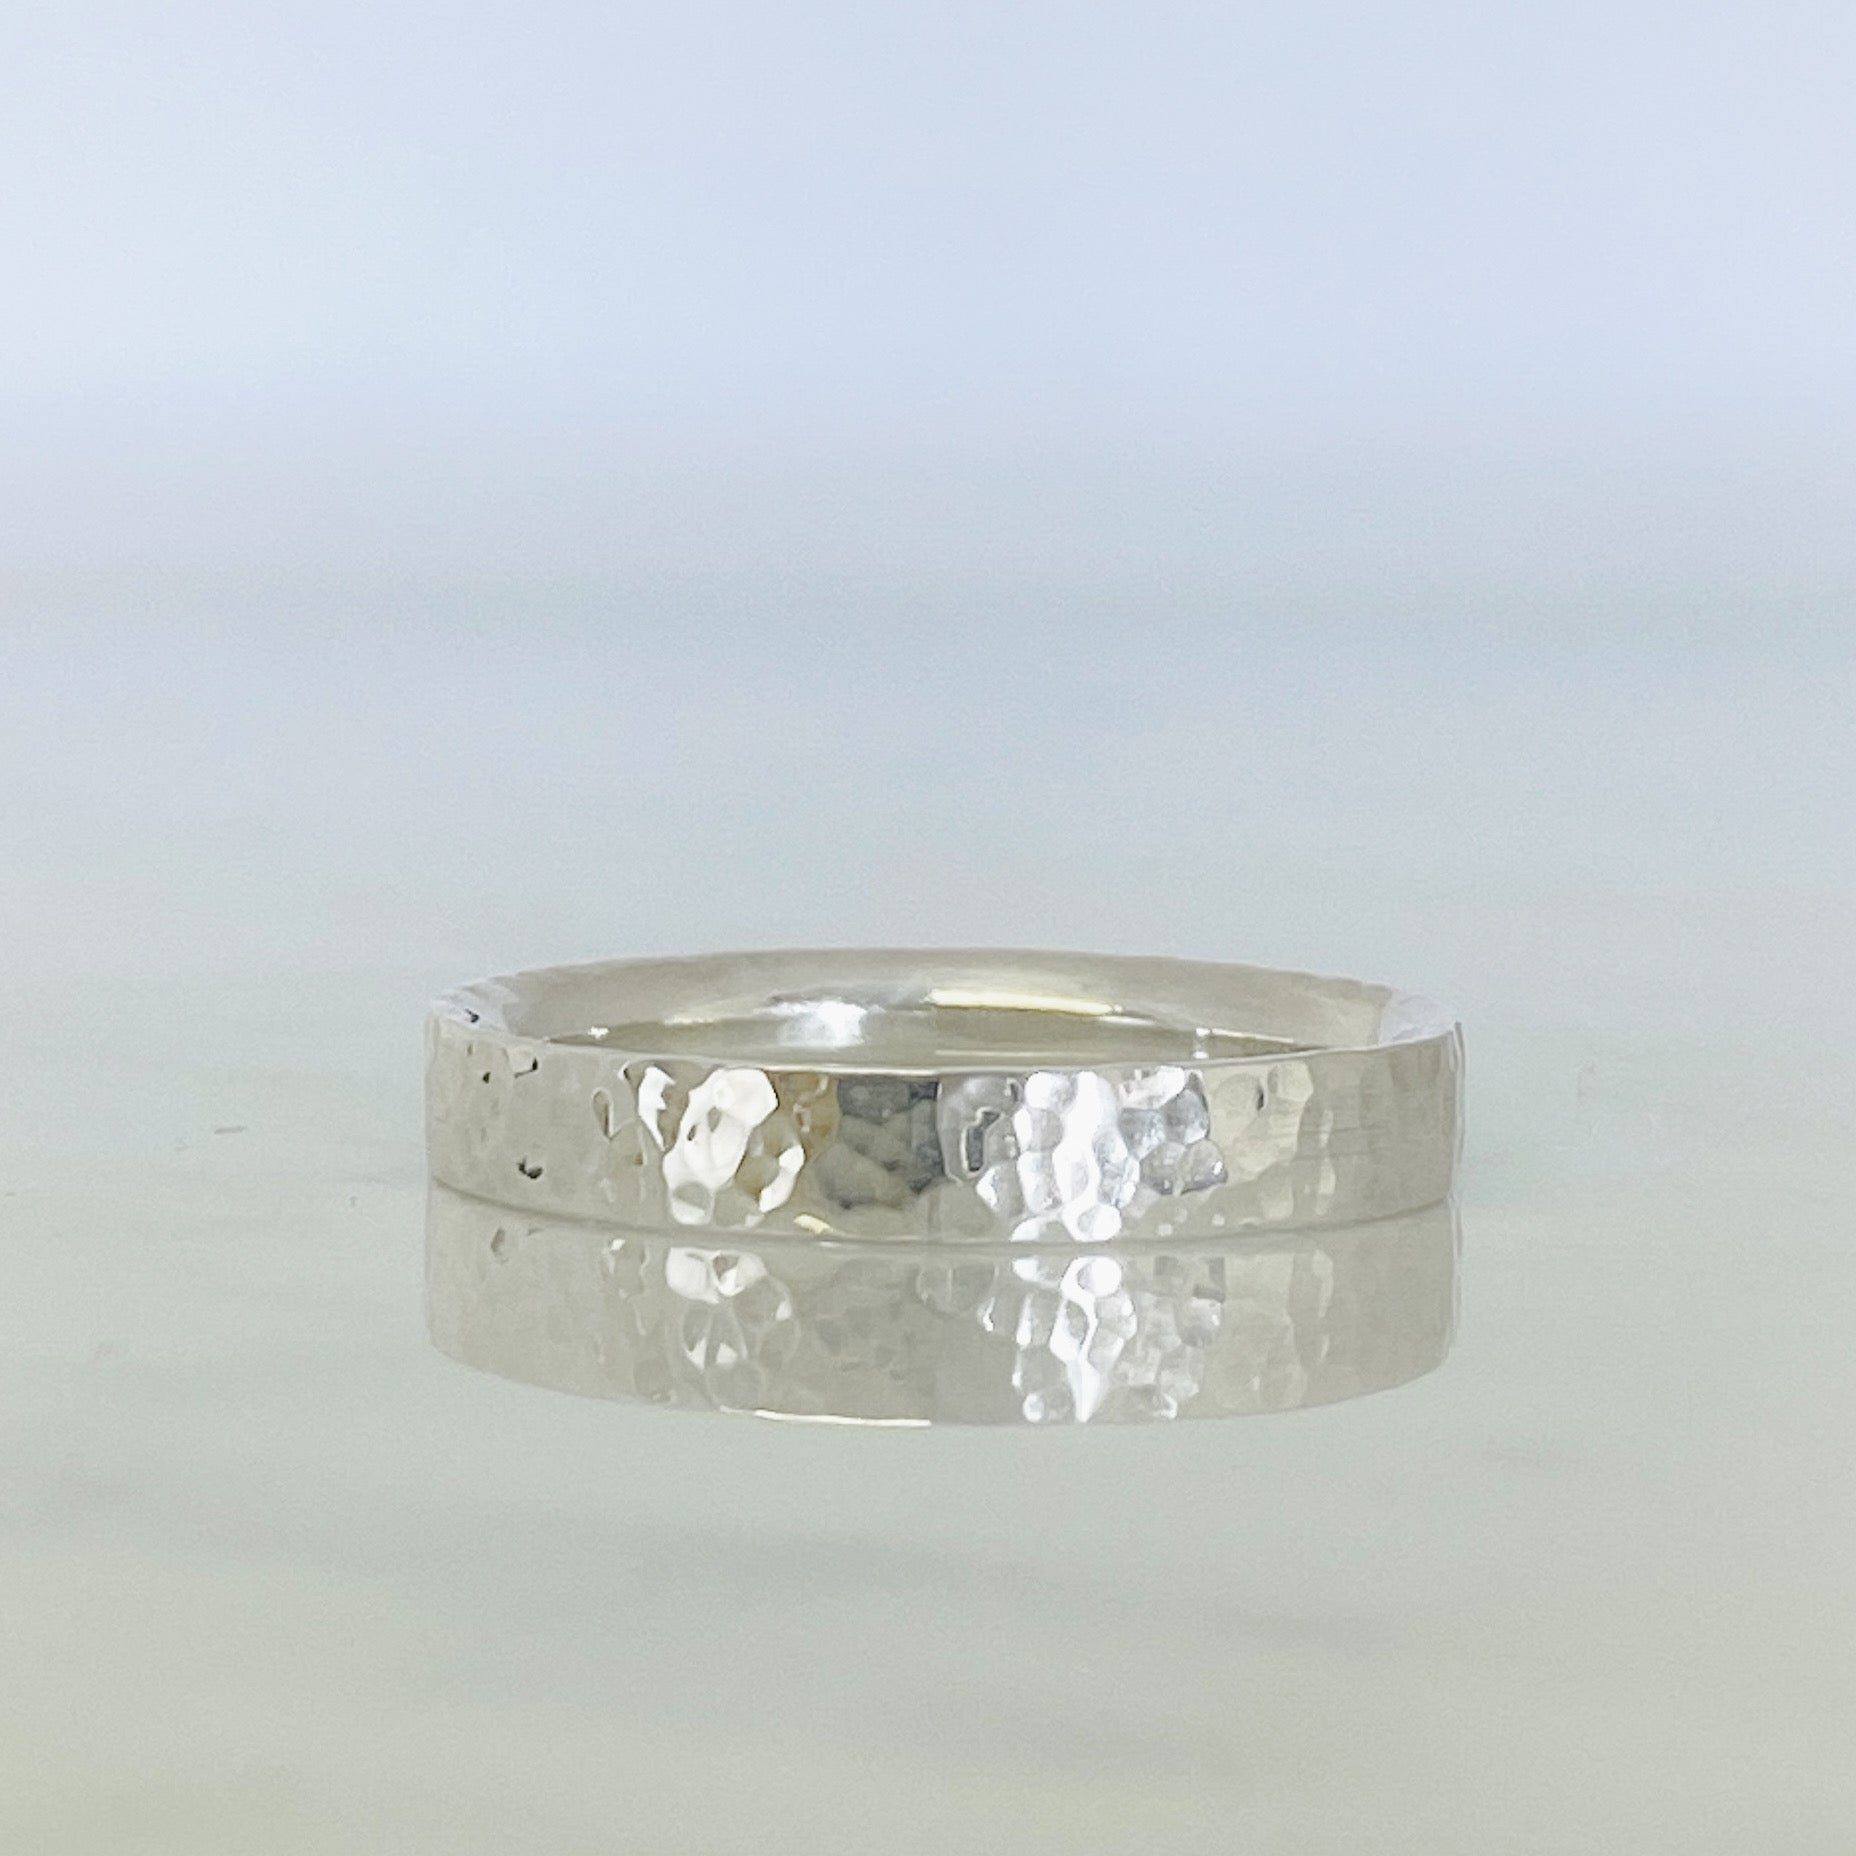 Silver Dimpled Wedding Ring